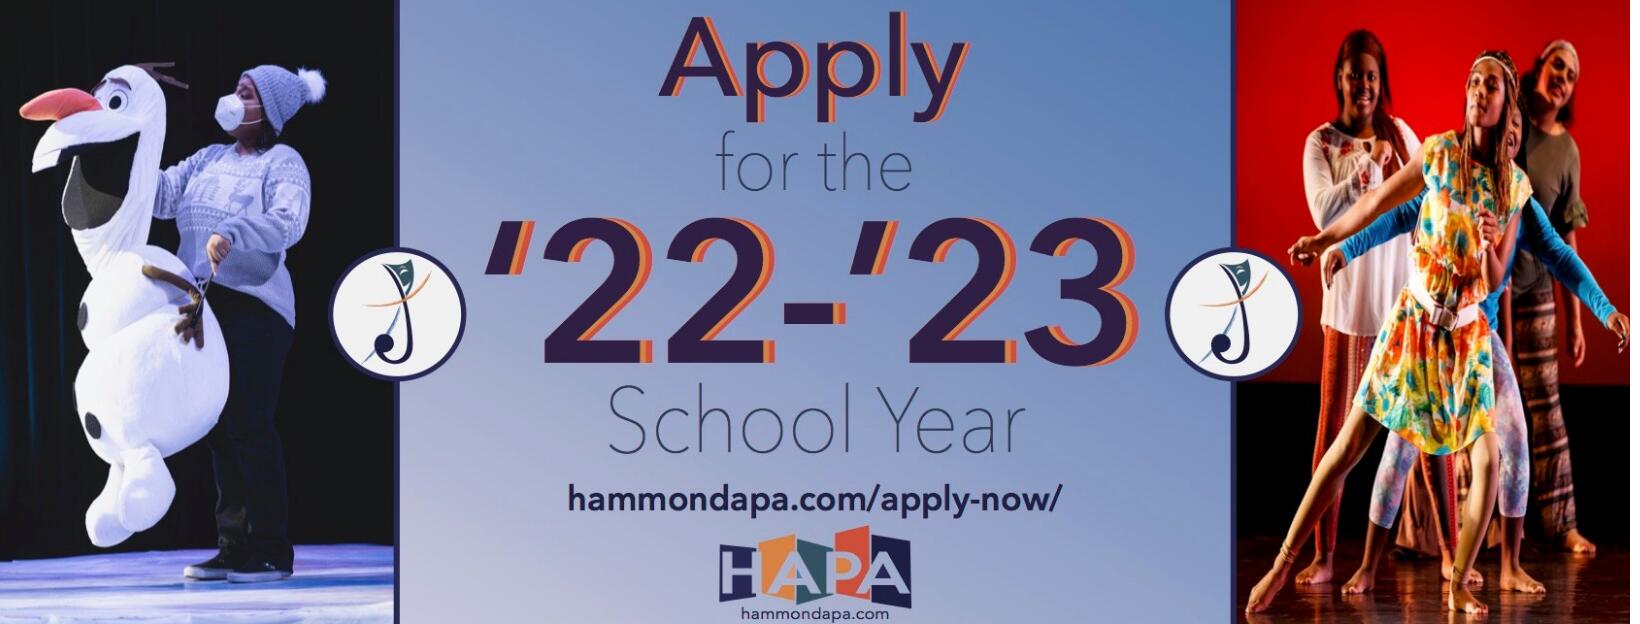 Apply for the 2022-23 School Year